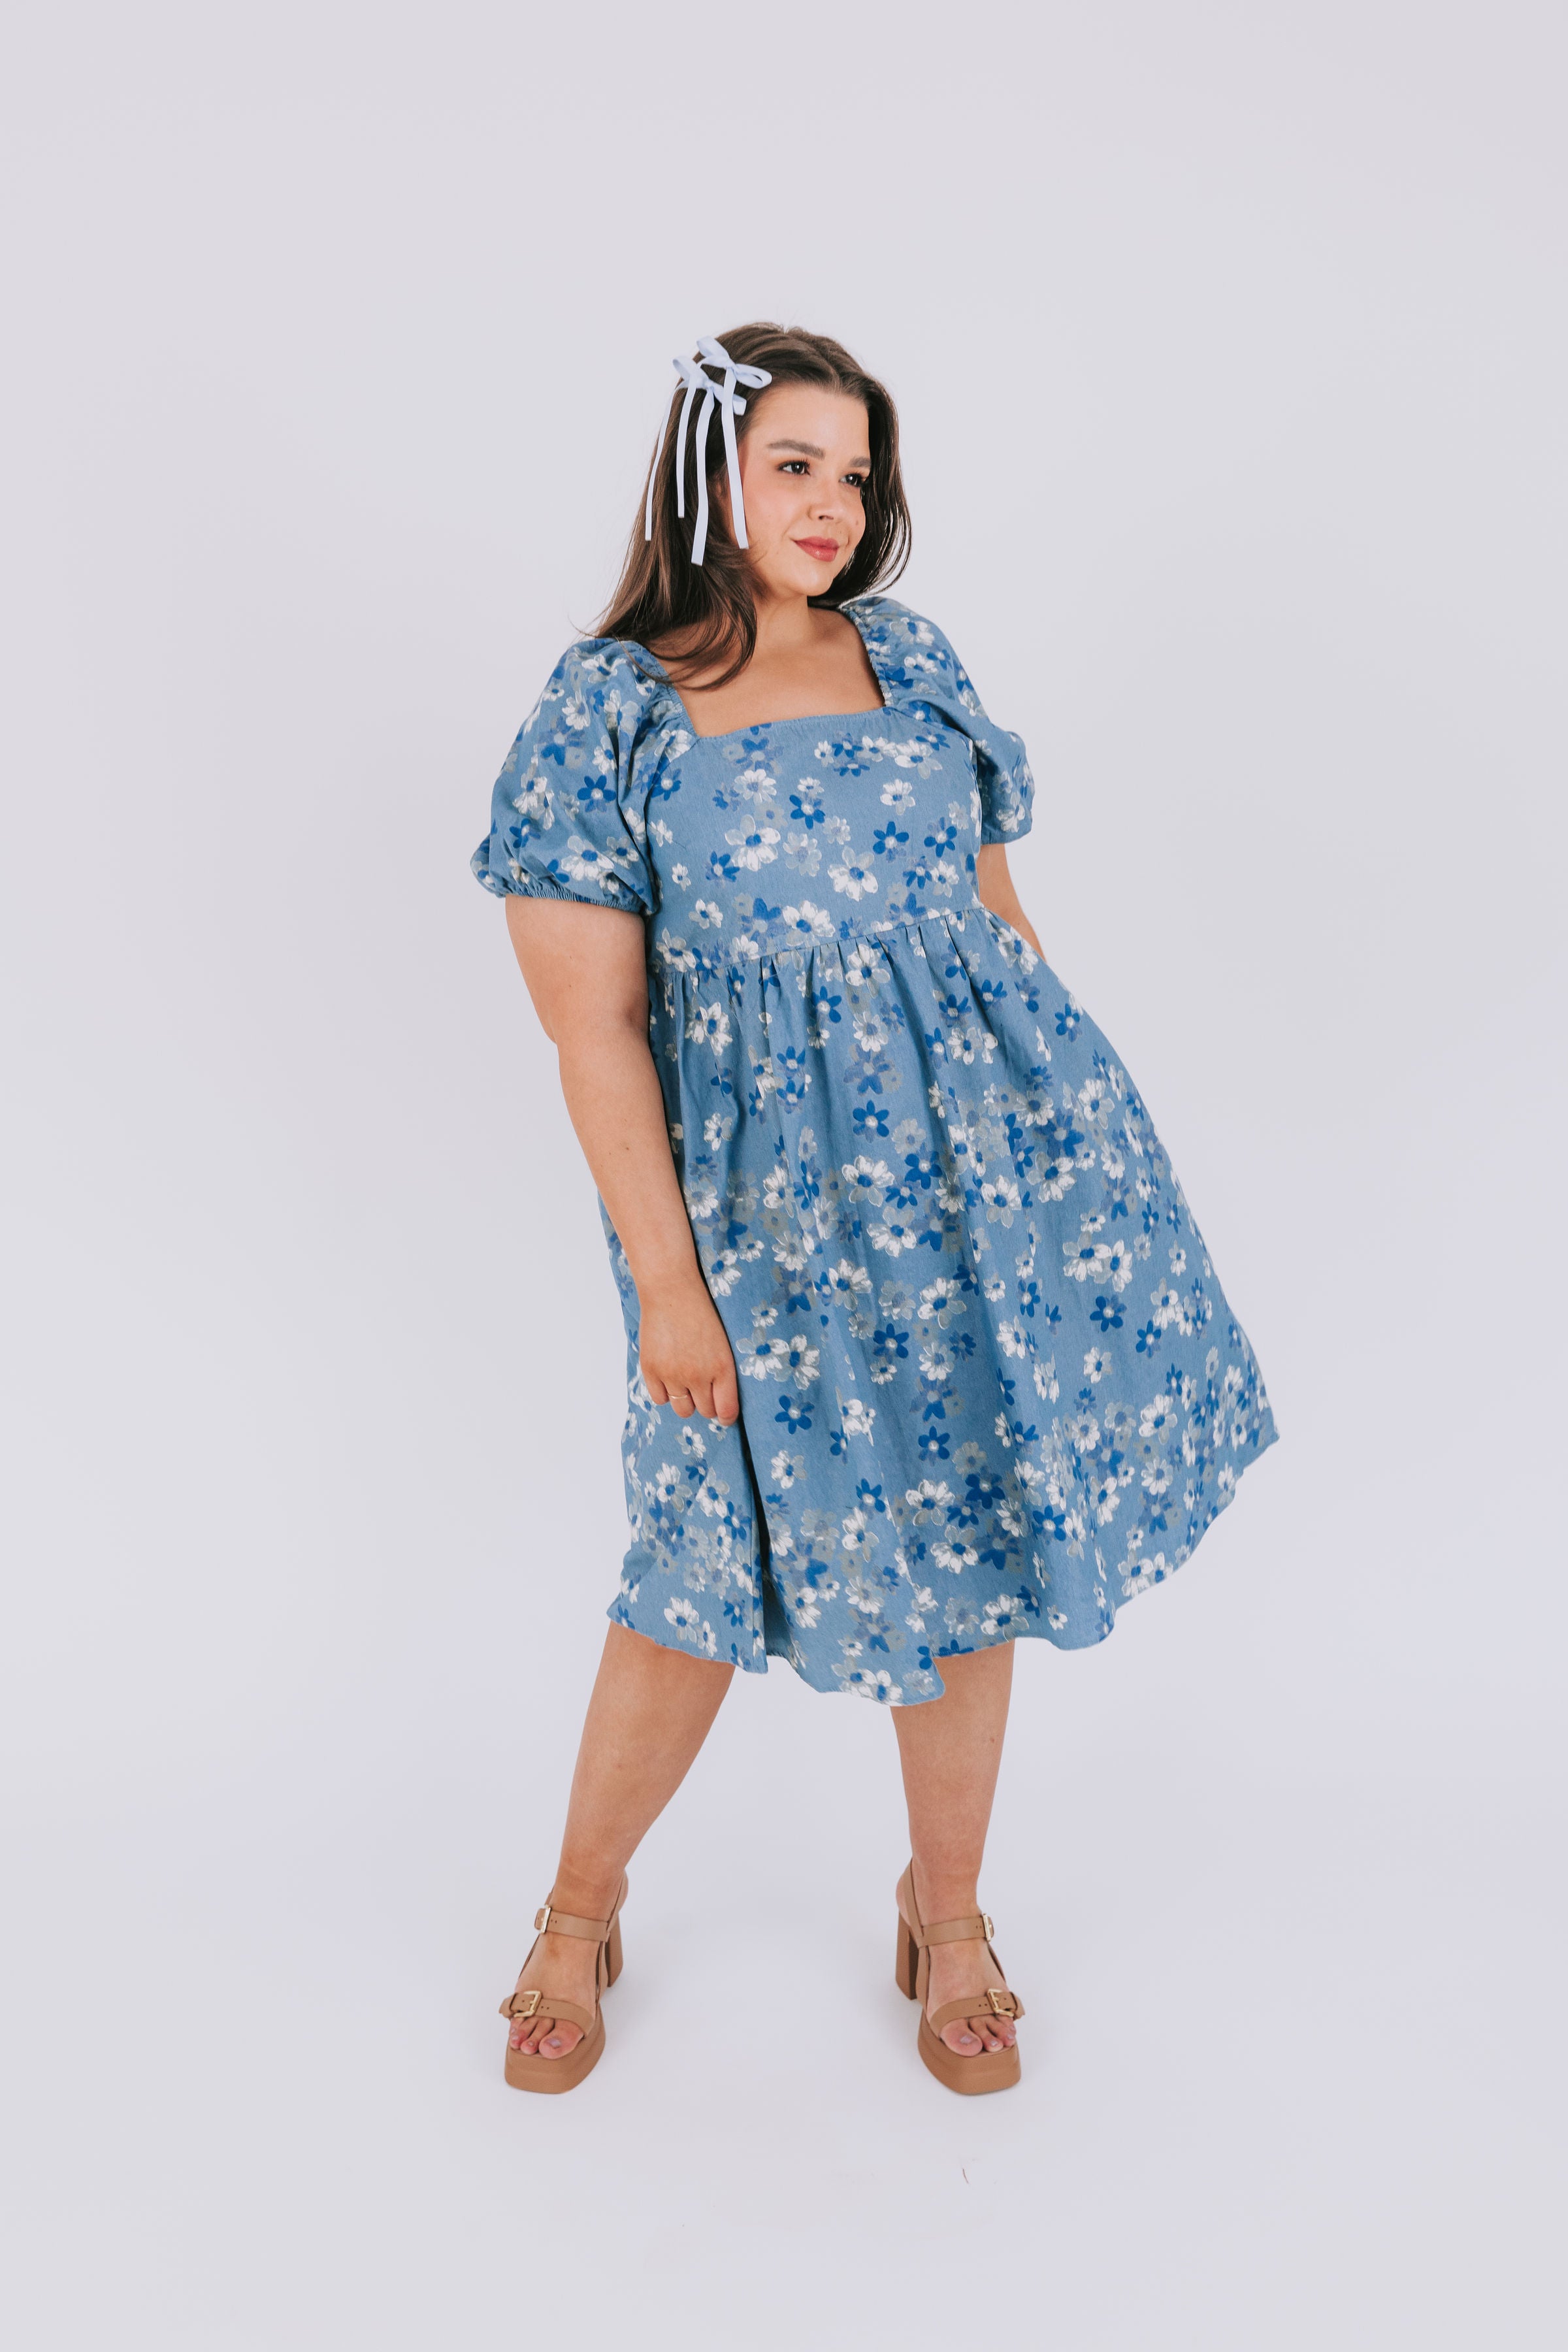 PLUS SIZE - One Of Those Dress